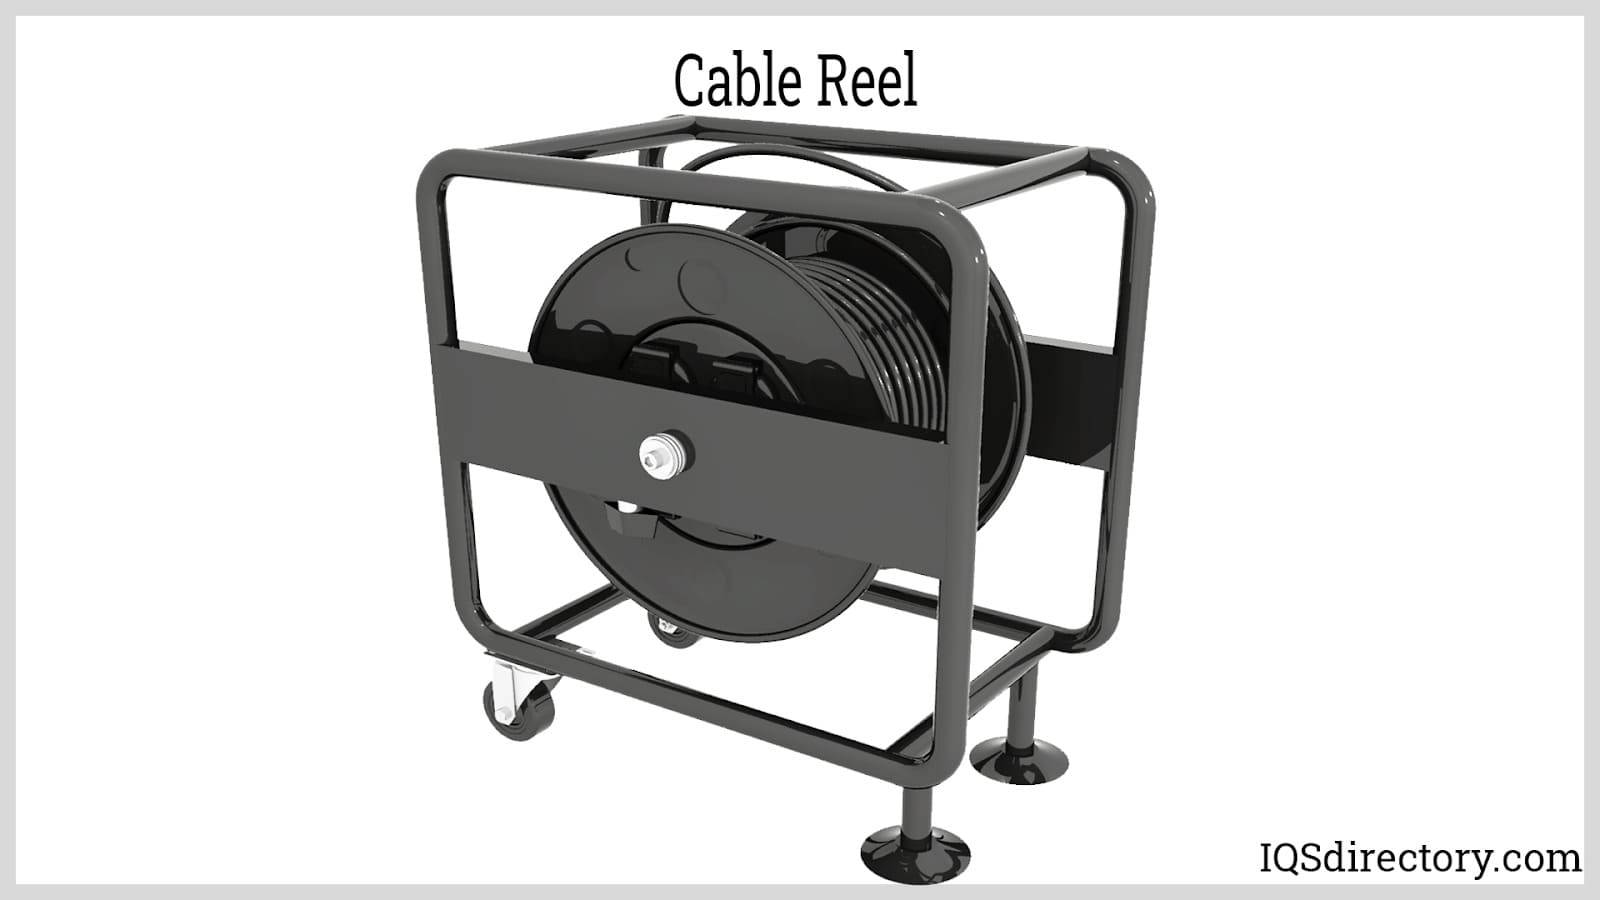 https://www.iqsdirectory.com/articles/hose-reel/cable-reels/cable-reel.jpg